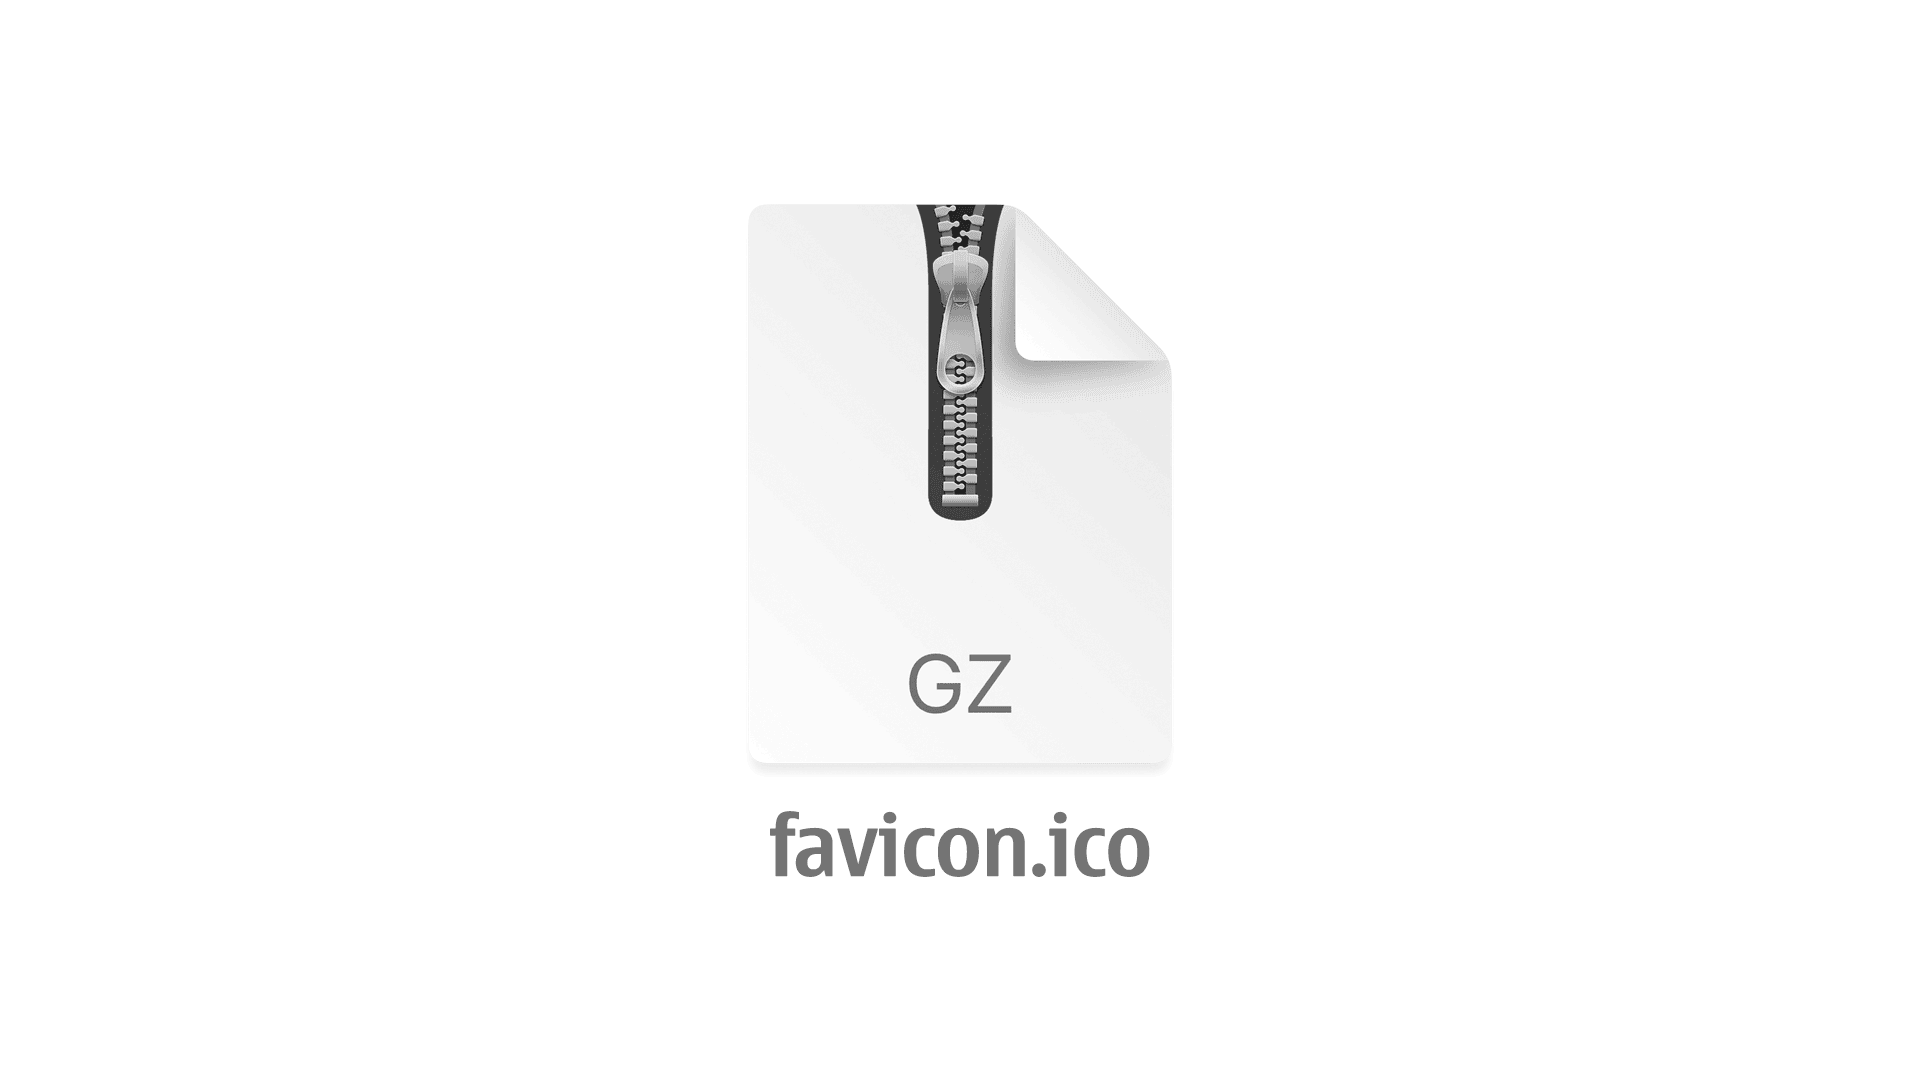 Serving GZIP compressed Favicon with Netlify